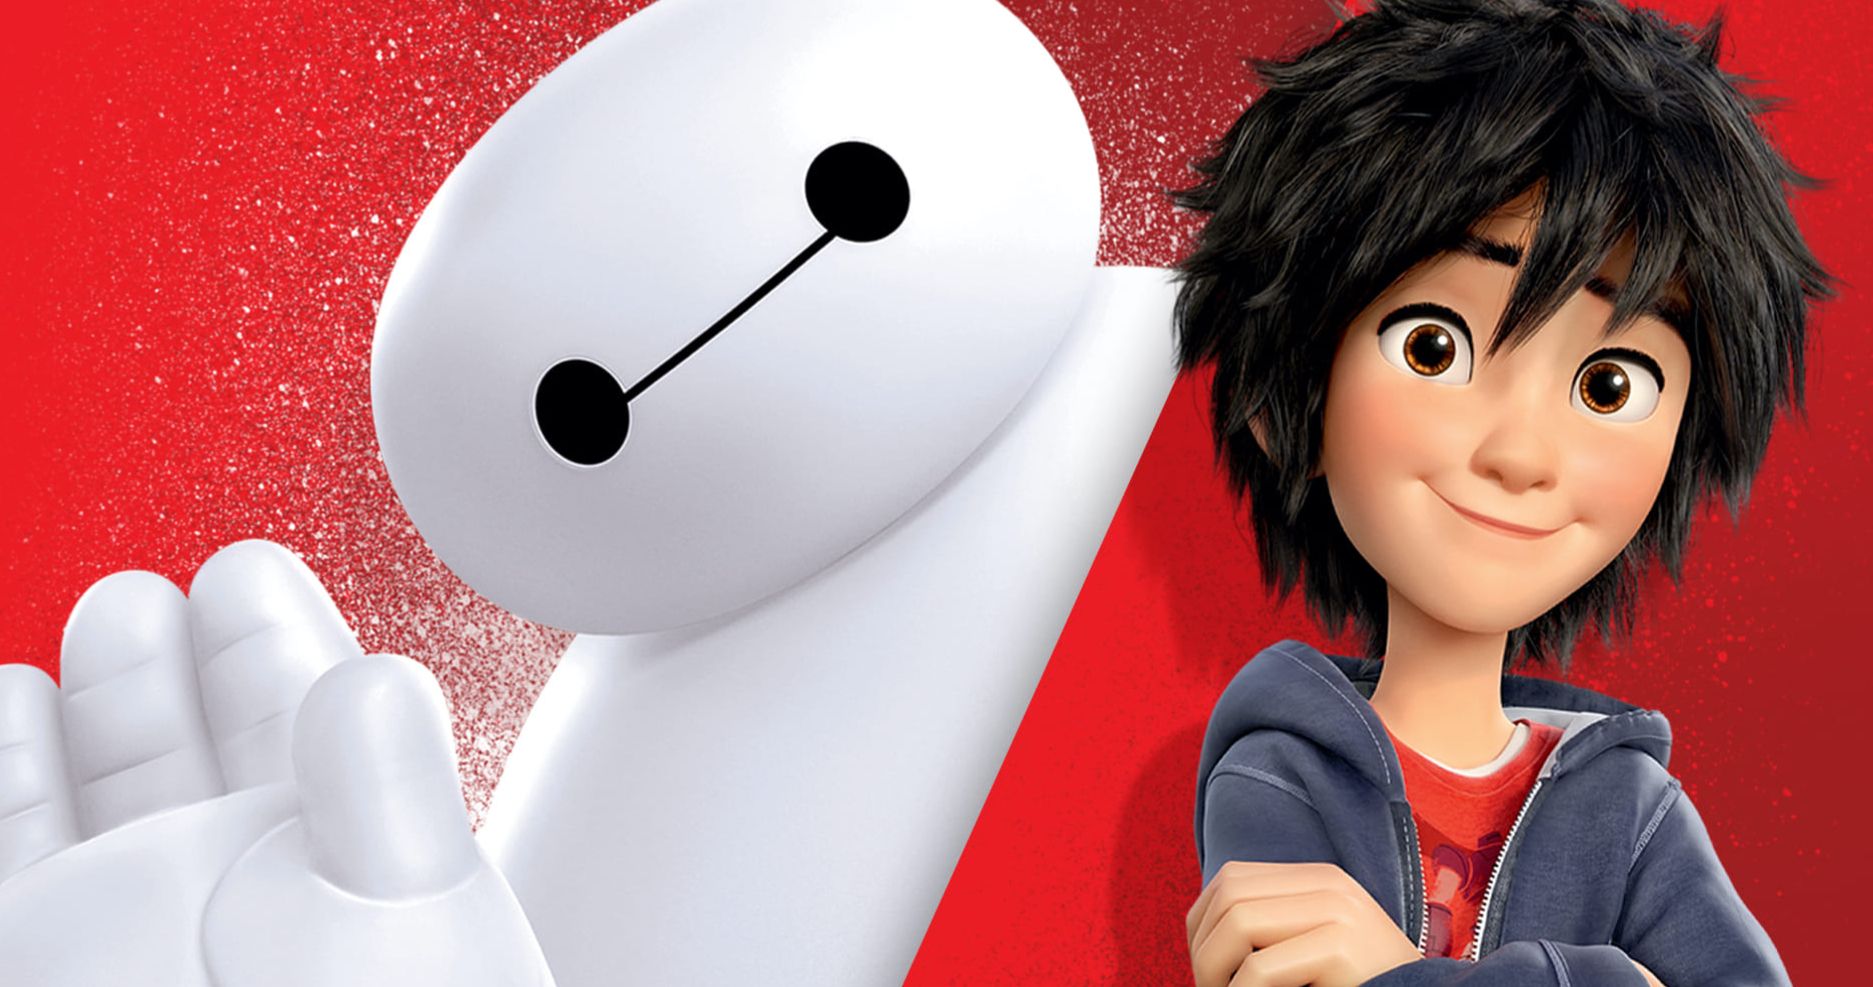 Big Hero 6 Characters Are Not Getting a Live-Action Reboot in the MCU Despite Rumors